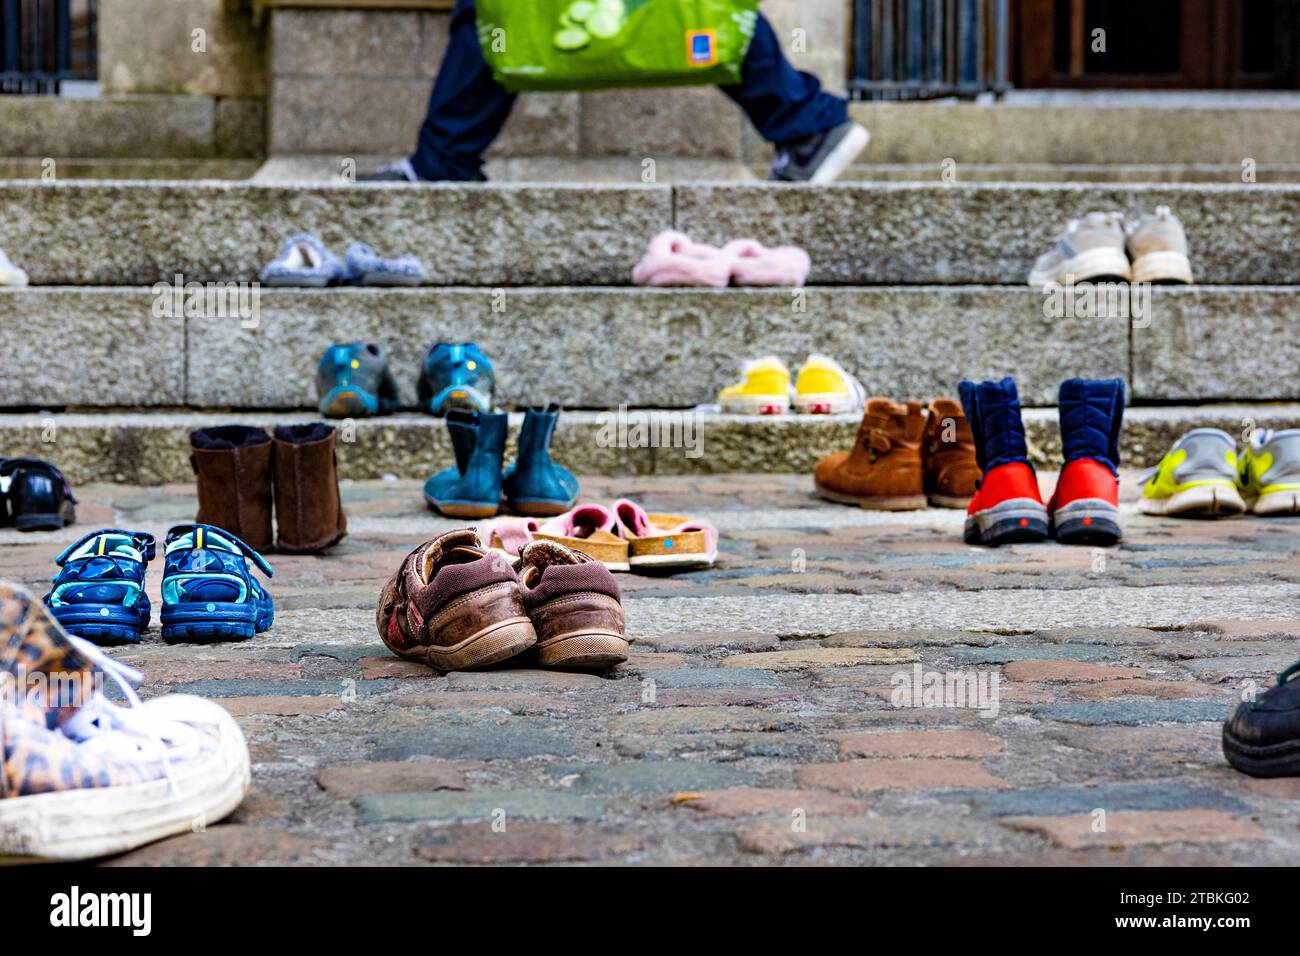 'We’ve abandoned these shoes outside Truro Cathedral like our MPs have abandoned child refugees” - The shoes represent refugee family separation. Stock Photo